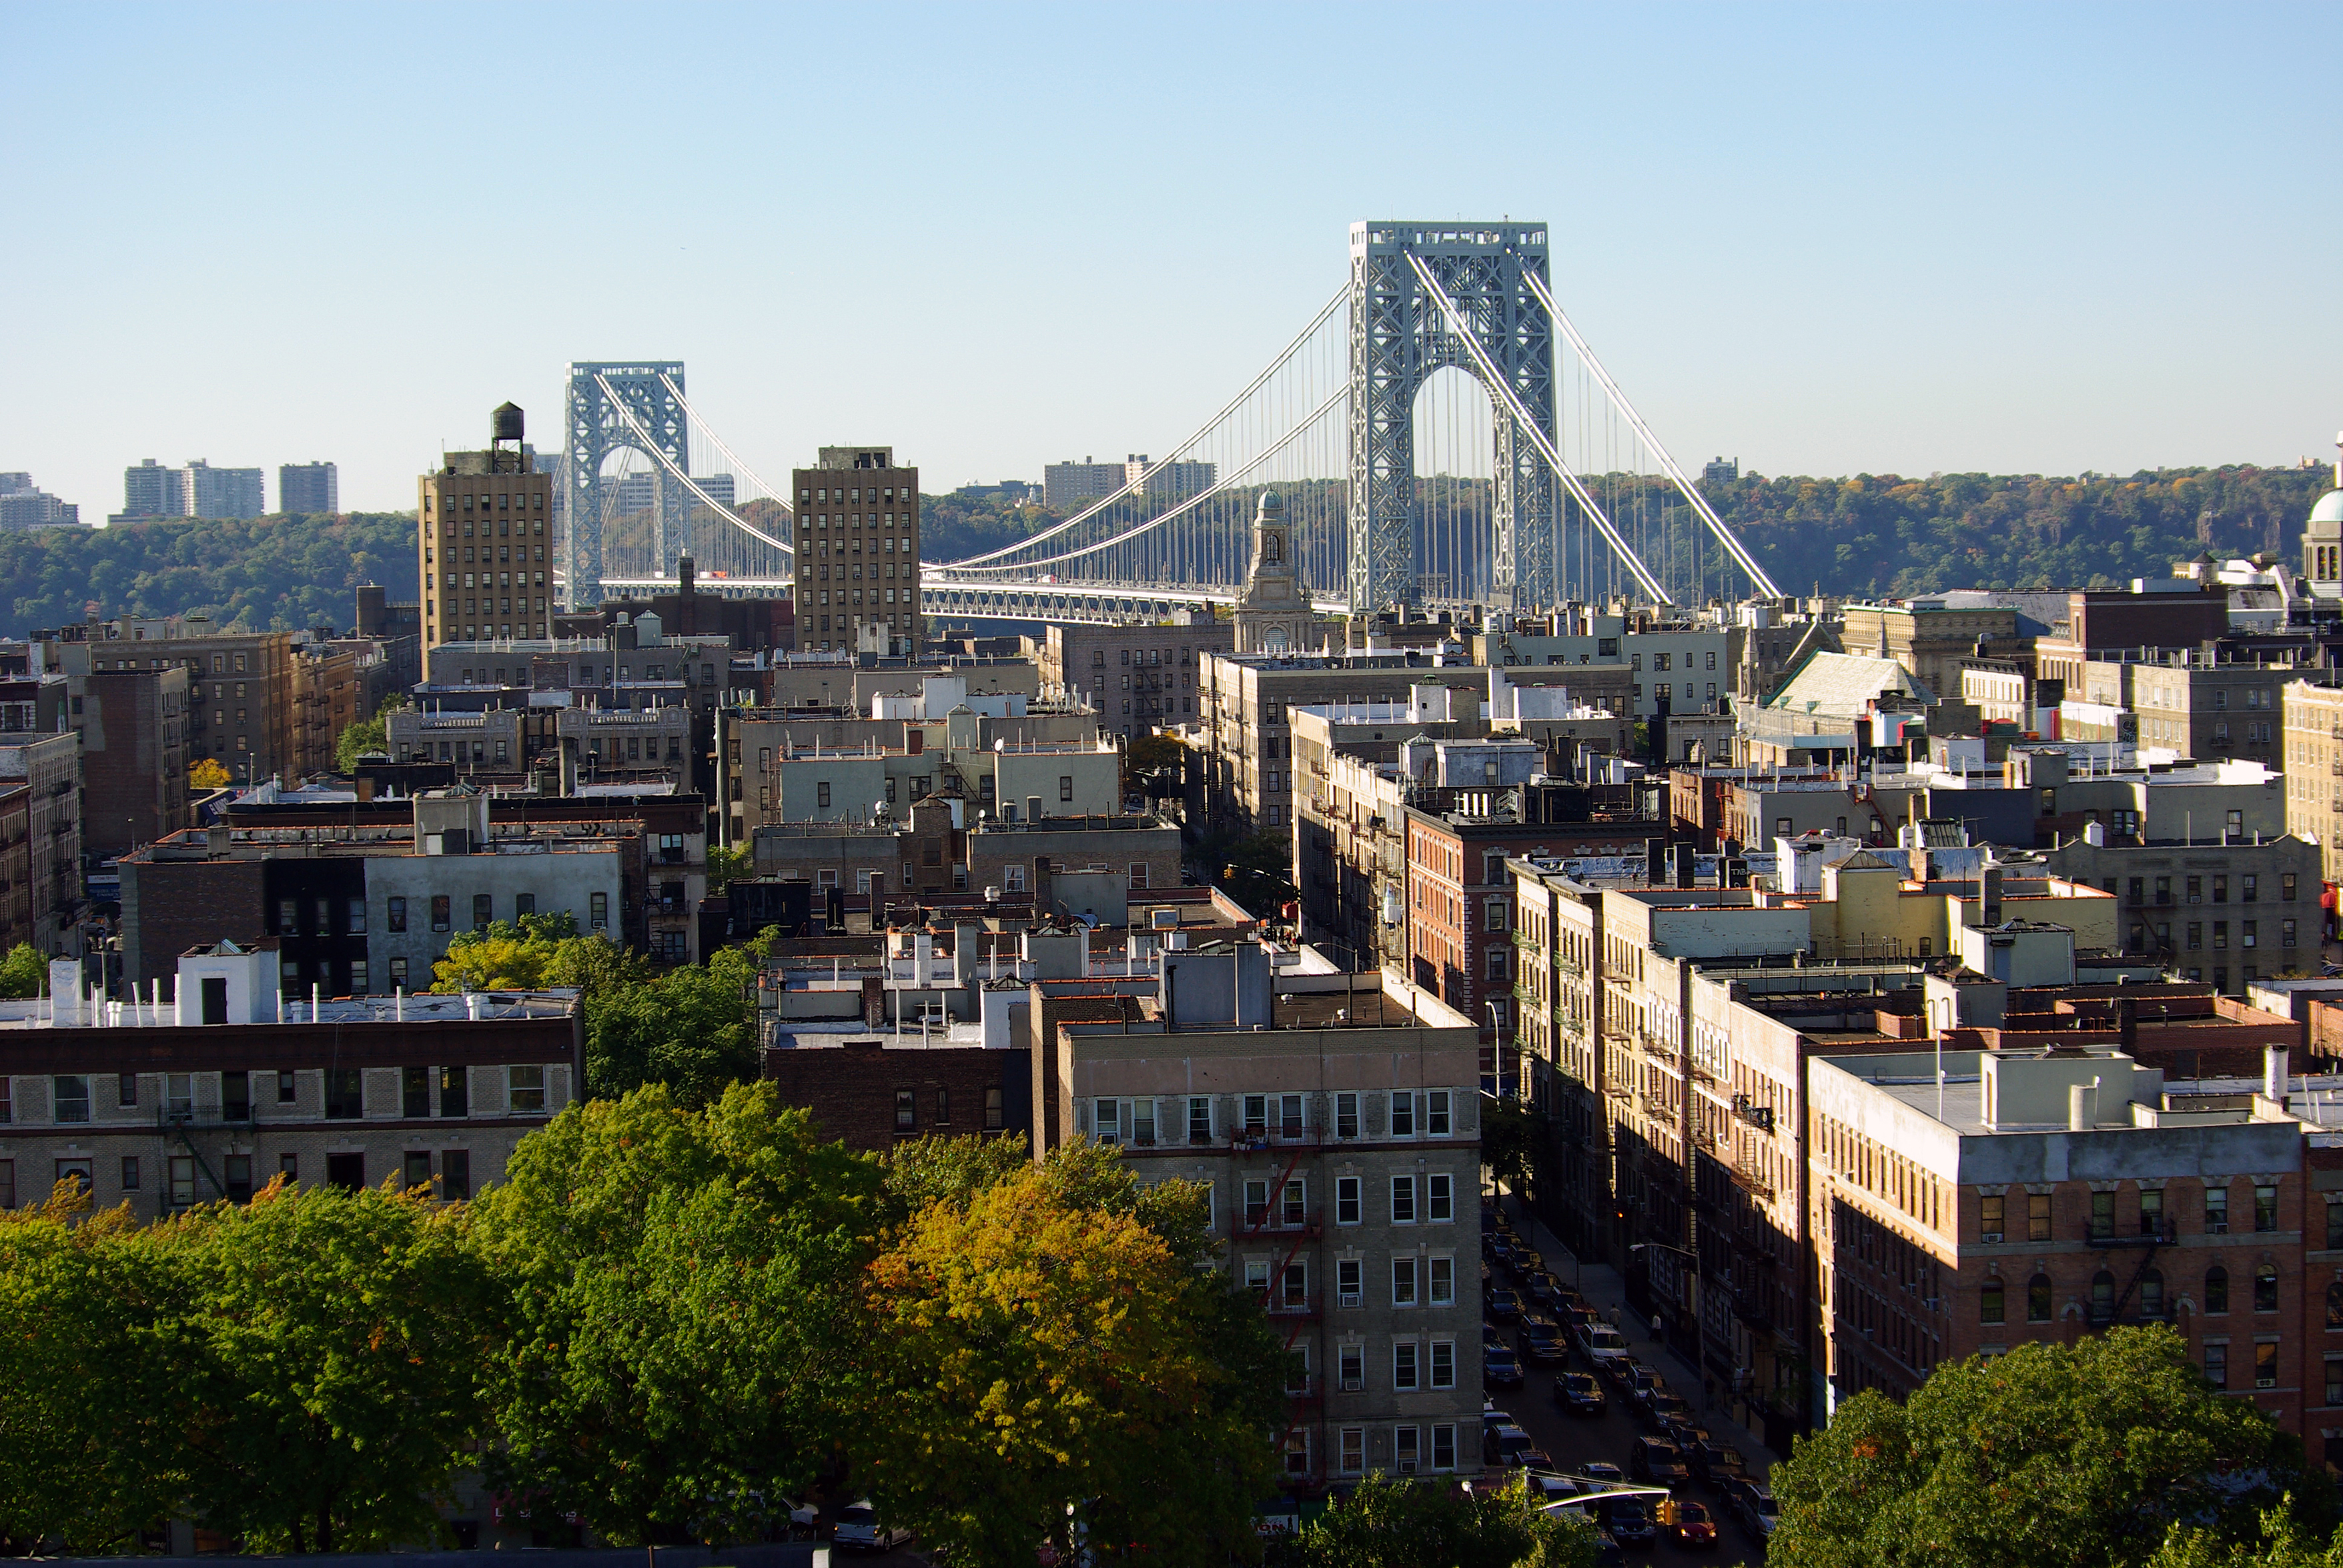 Several medium rise buildings and green trees are seen in the foreground with the George Washington Bridge in the background